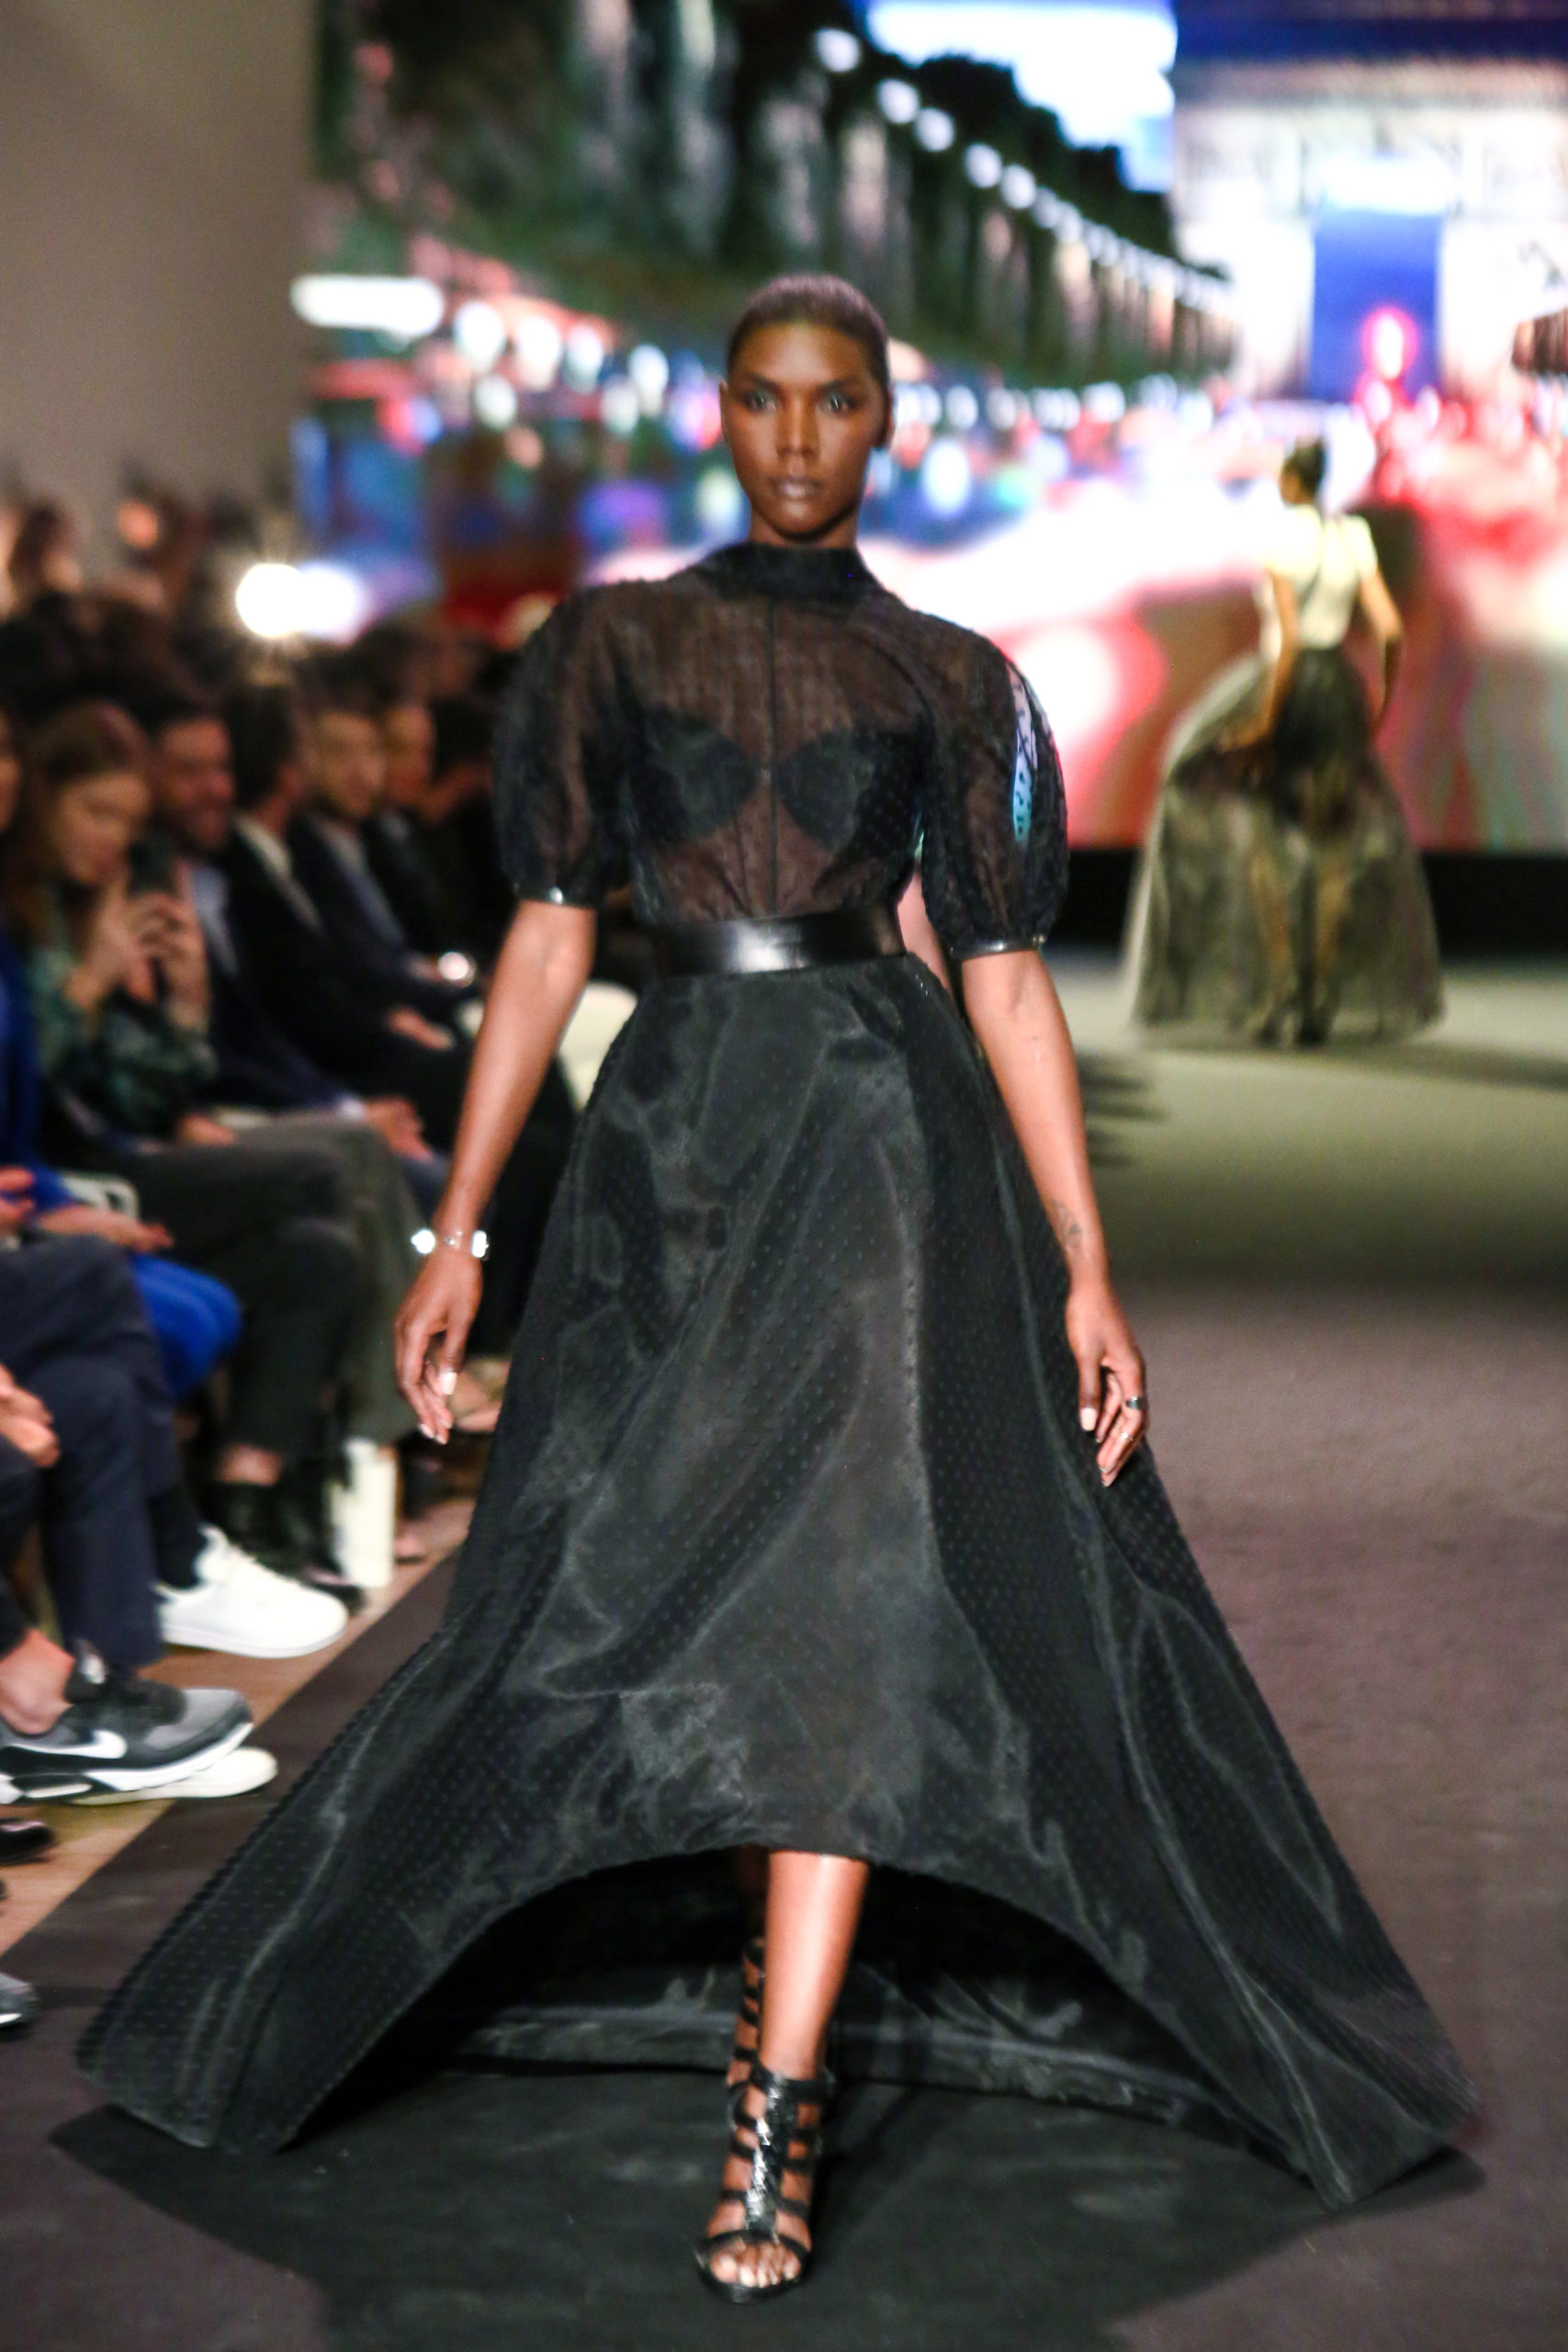 AFRICA-FASHION-UP-EDITION-2-CLARISSE-HIERAIX-COUTURE-PARIS-DN-AFRICA-DNA-INTERNATIONAL-MEDIA-PARTNER-MD0A1935